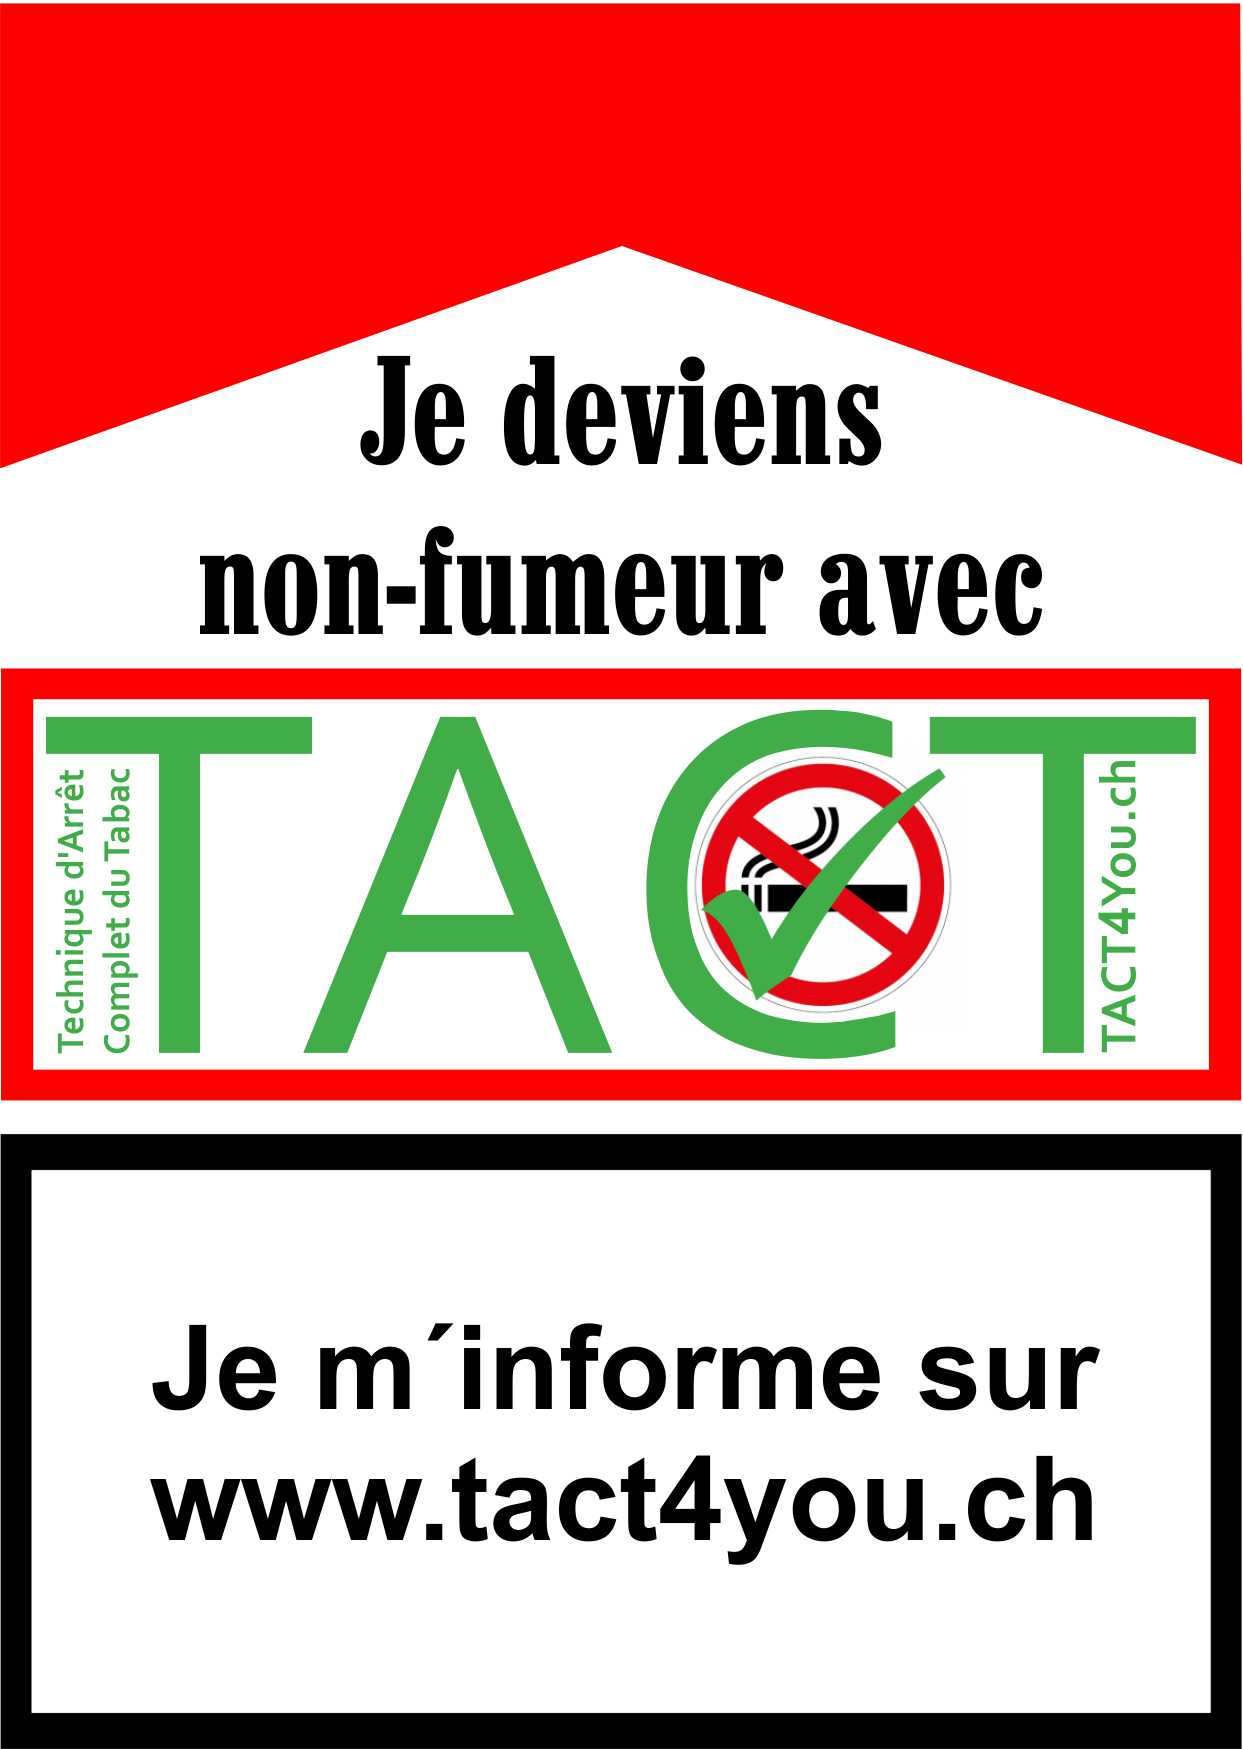 www.tact4you.ch